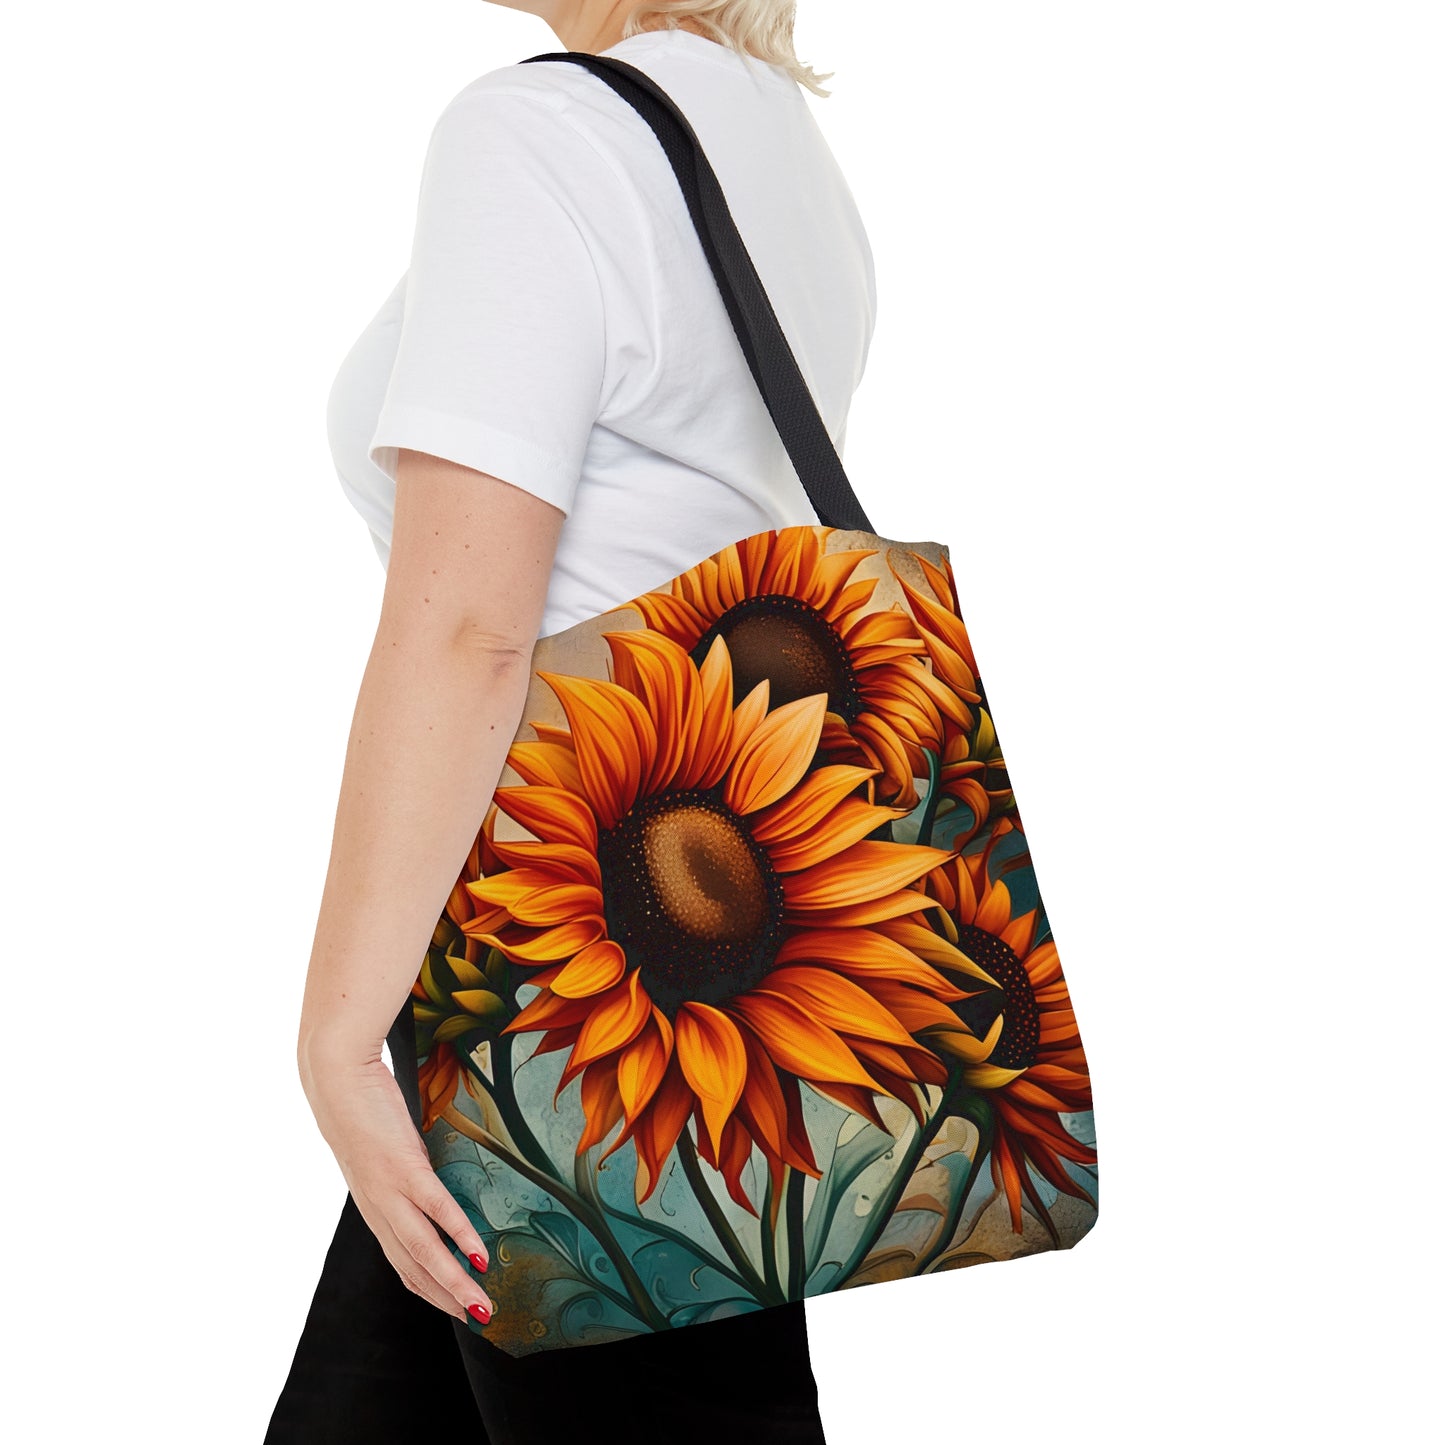 Sunflower Crop on Distressed Blue and Copper Background Printed on Tote Bag medium